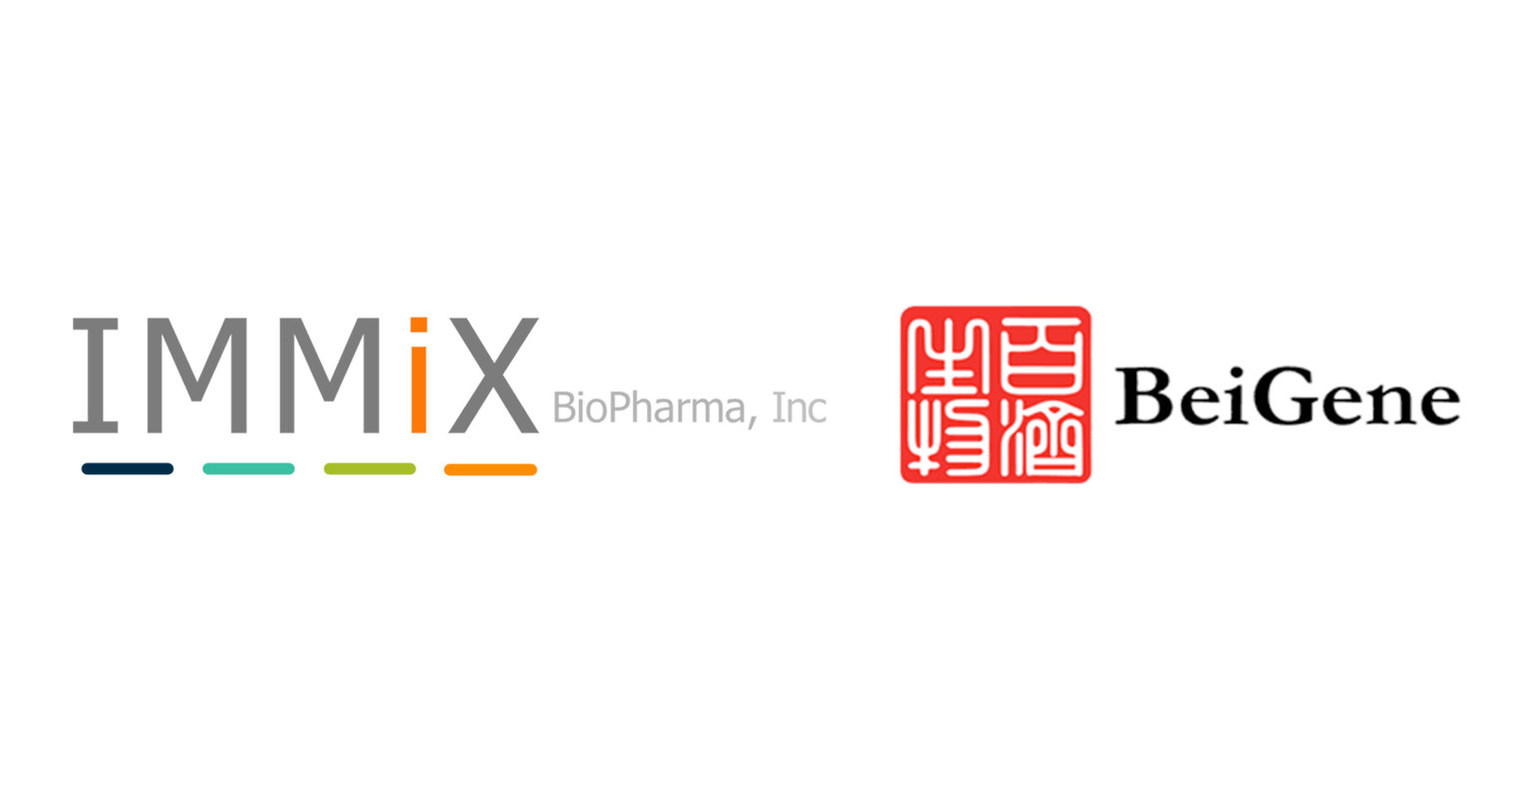 Immixbio Announces Clinical Trial And Supply Agreement With Beigene To